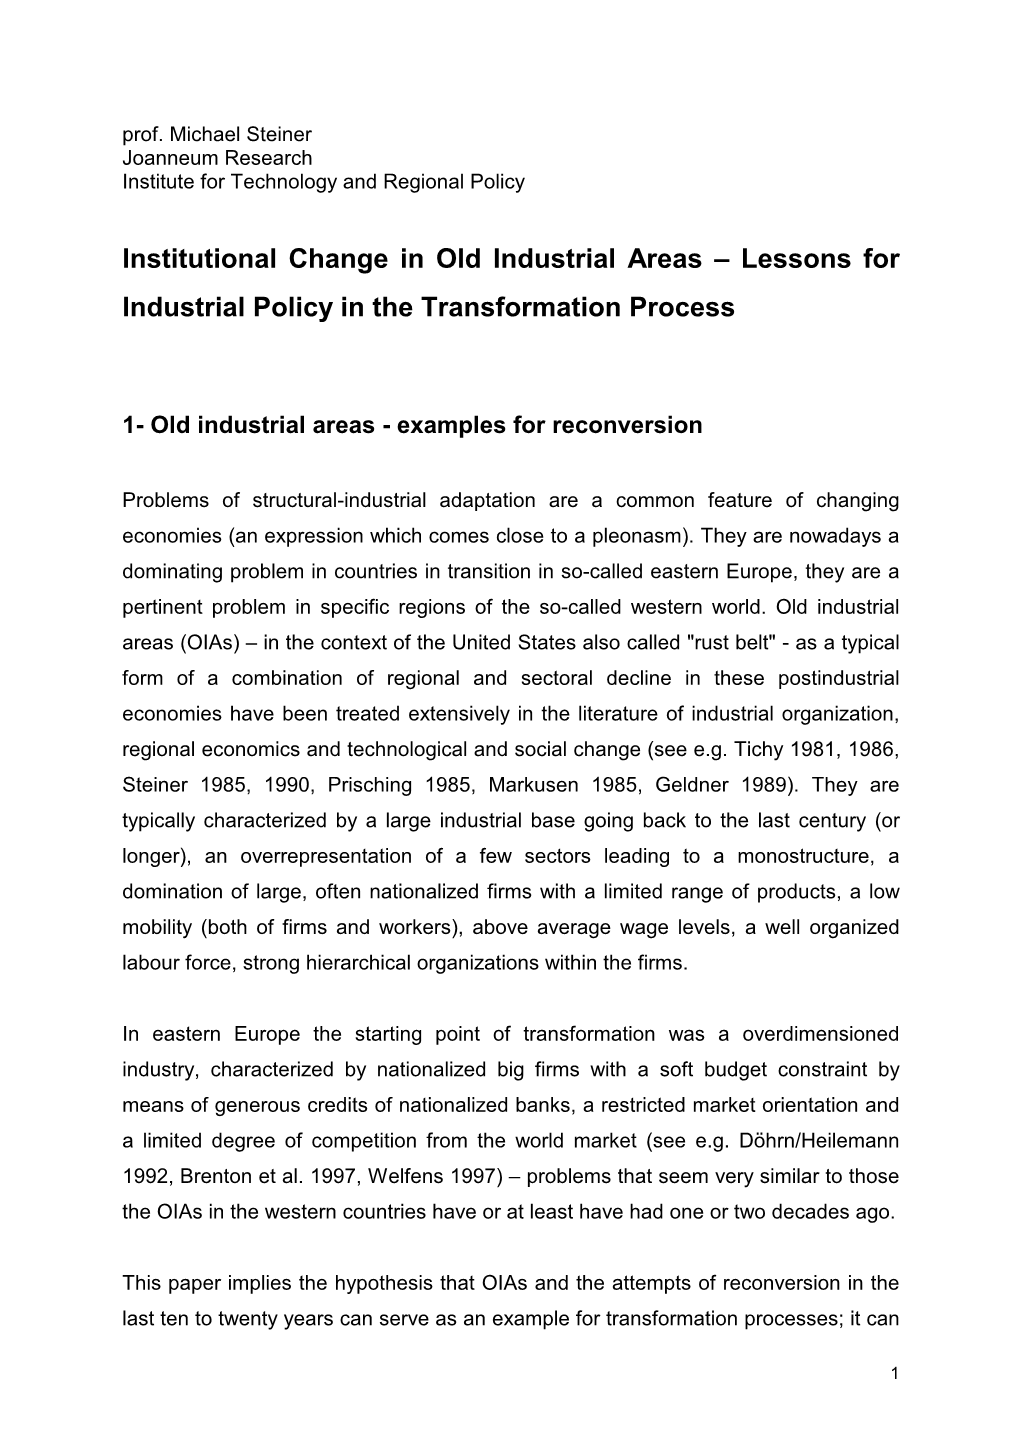 Institutional Change in Old Industrial Areas – Lessons for Industrial Policy in the Transformation Process